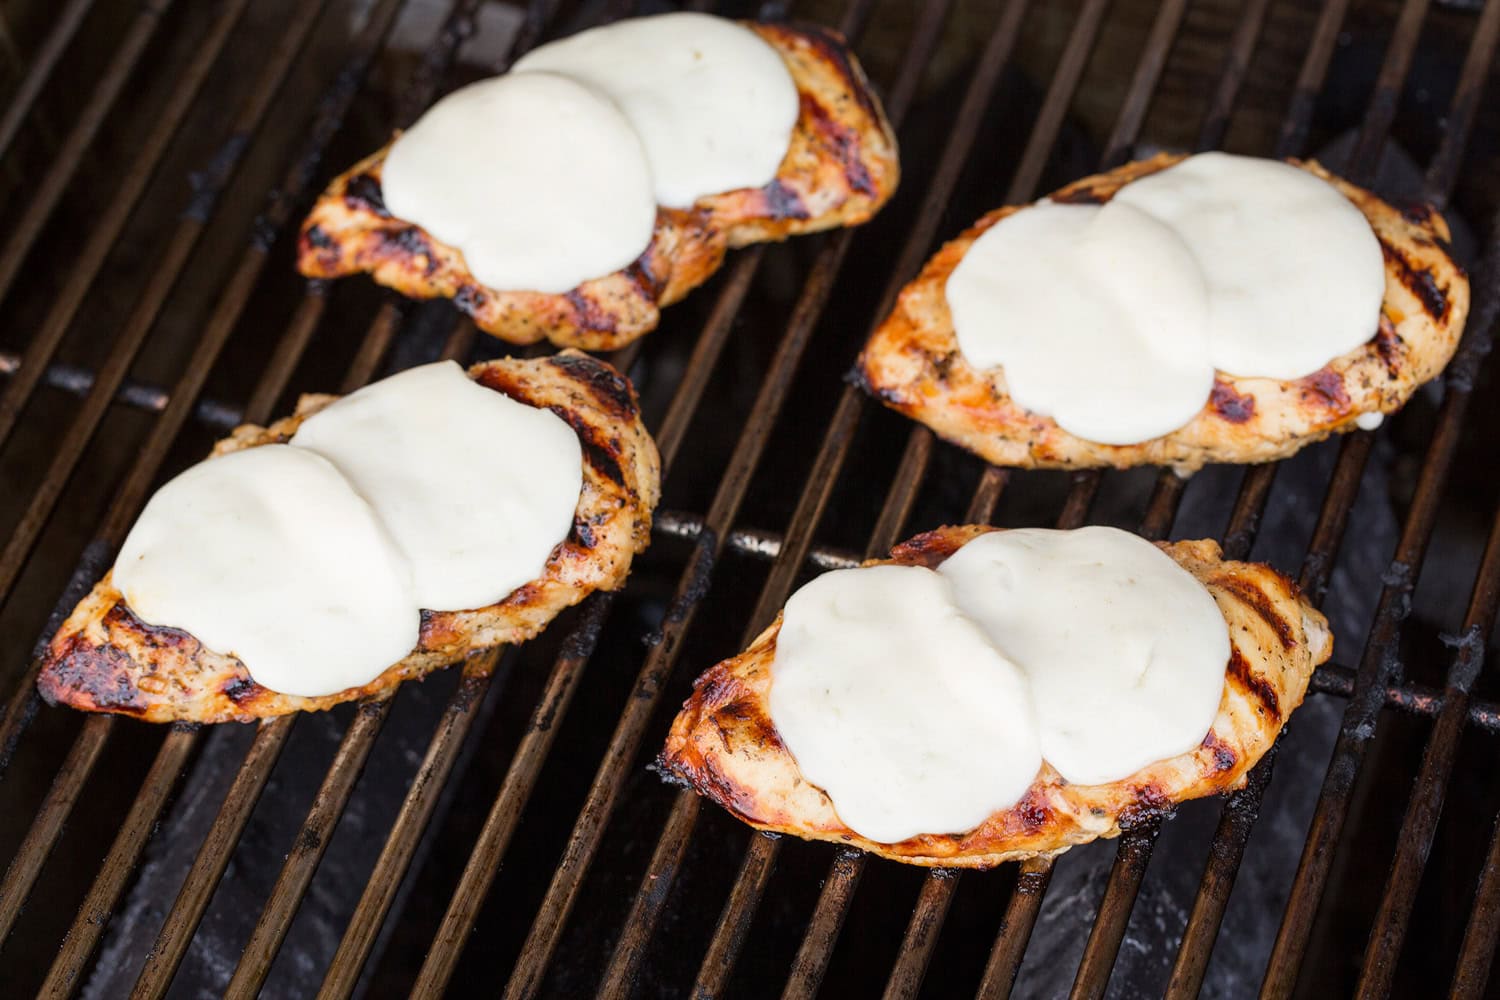 Mozzarella cheese melted over chicken breasts on grill.